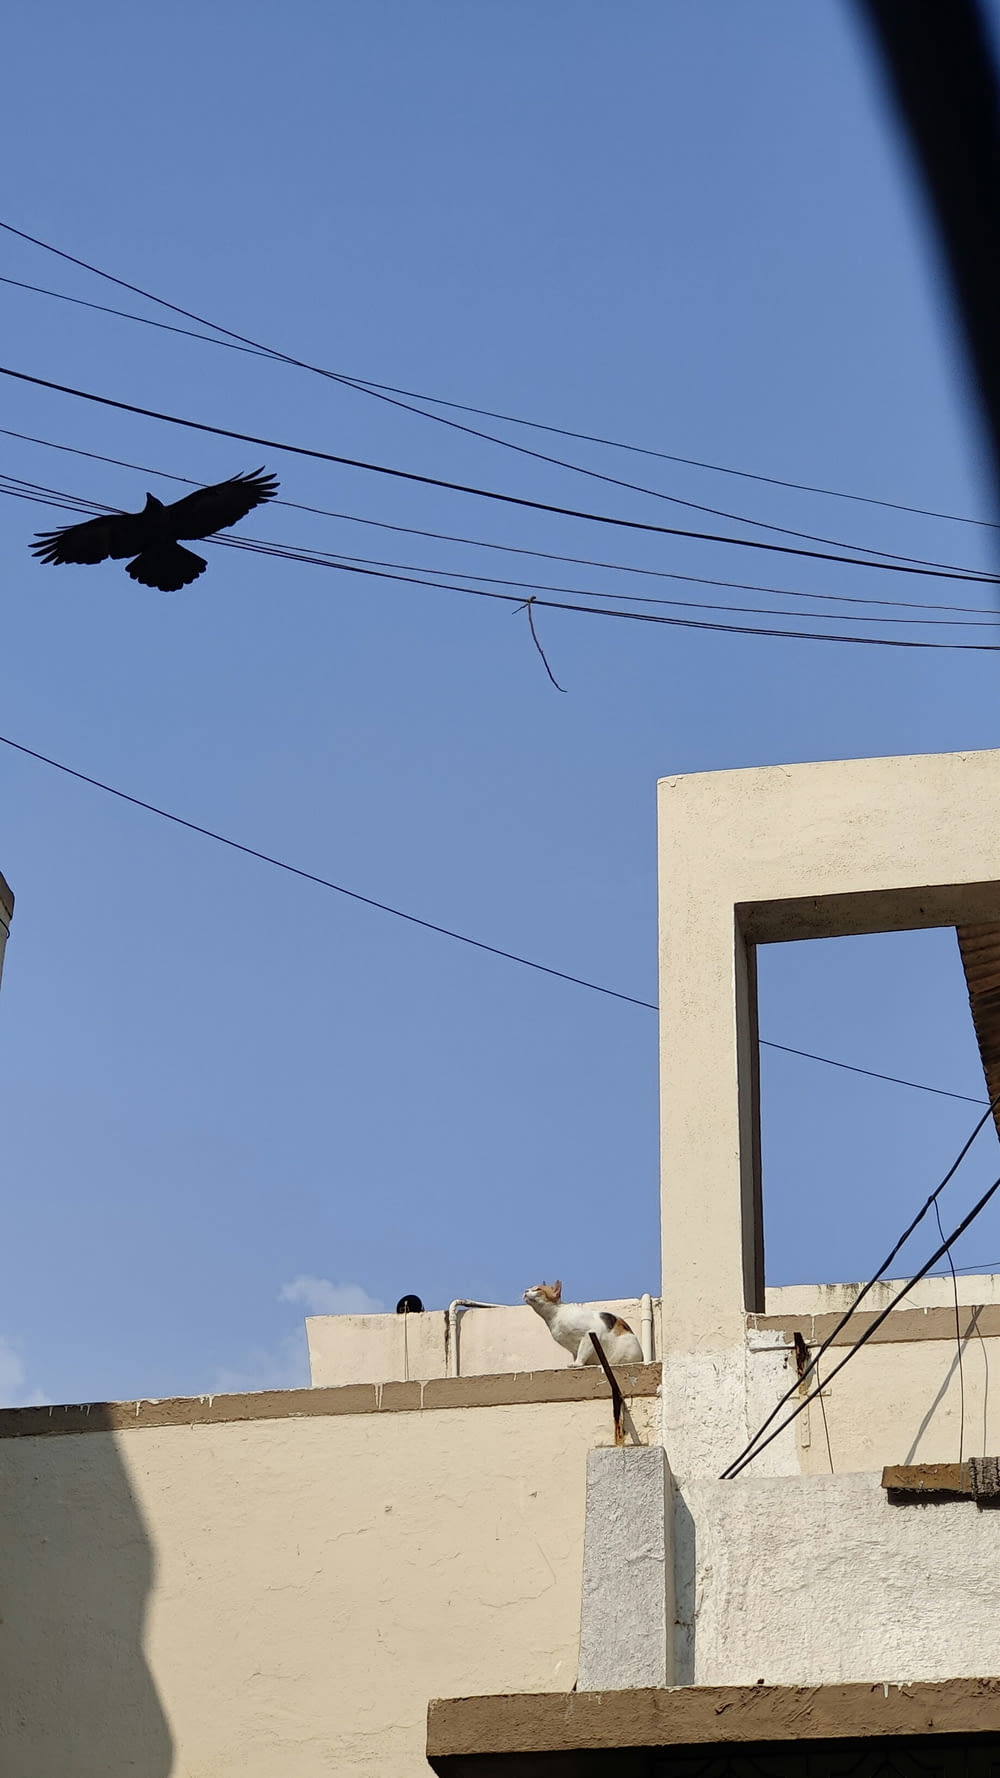 a bird flying over a building with power lines